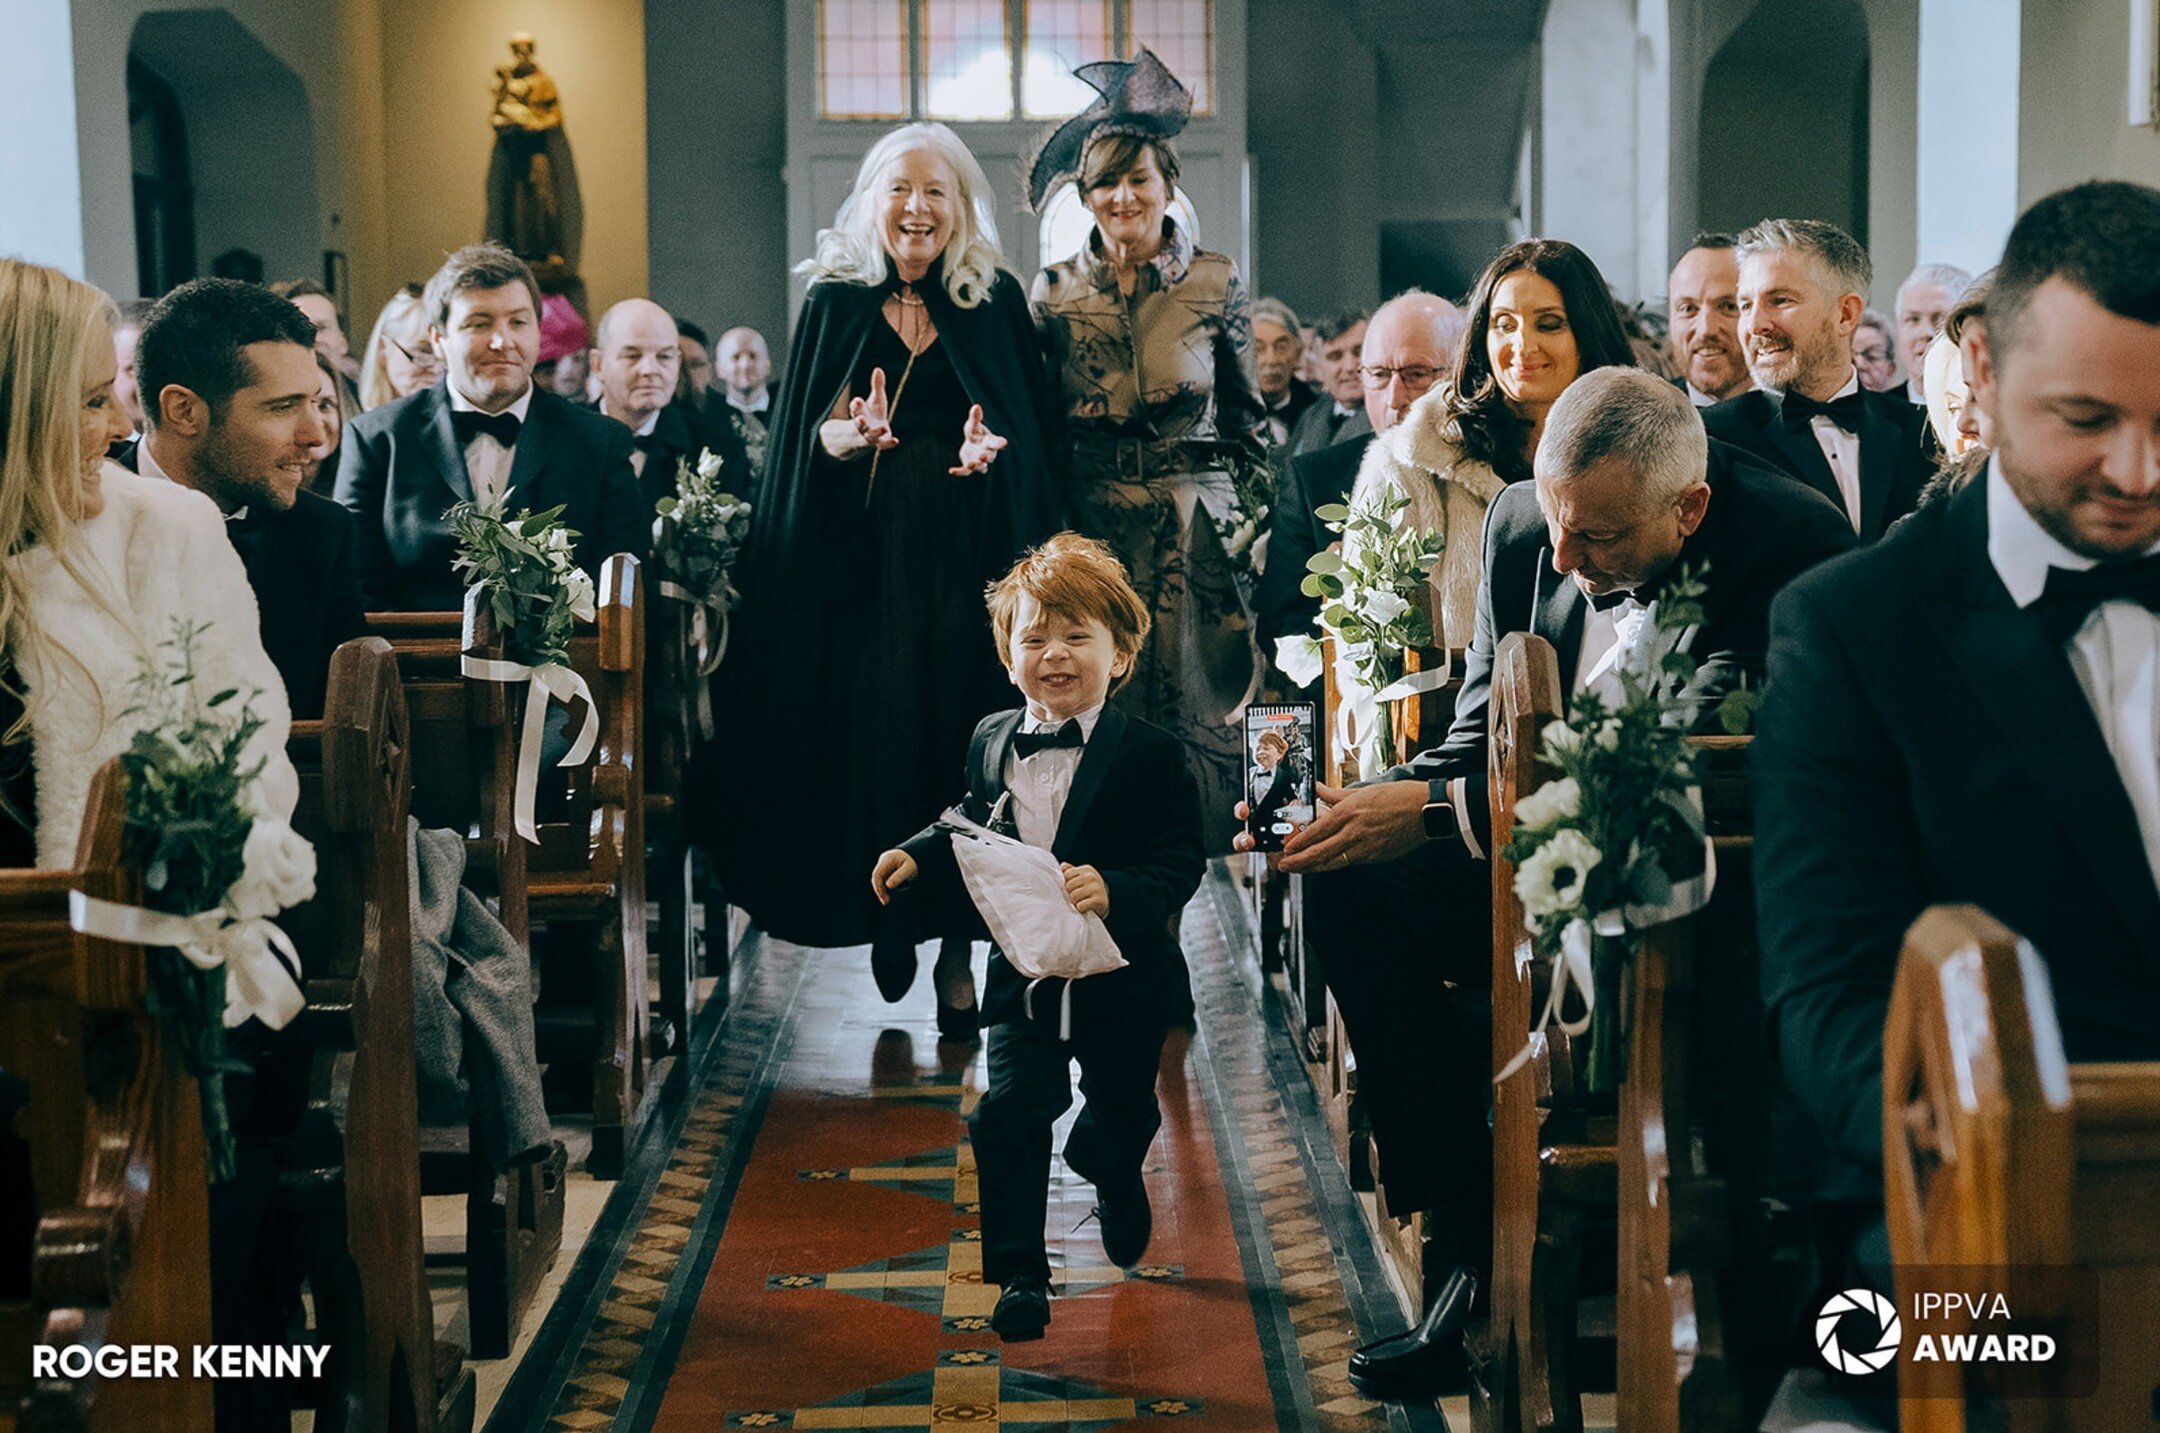 Love this shot of the ring bearer running up the aisle with his Grandmother's left behind! Another award winning photograph from the Winter Wedding Documentary Awards of the @i.p.p.v.a 
@kilshanehouse 

#banshachurch #portraitroom #ippav #kilshanehou